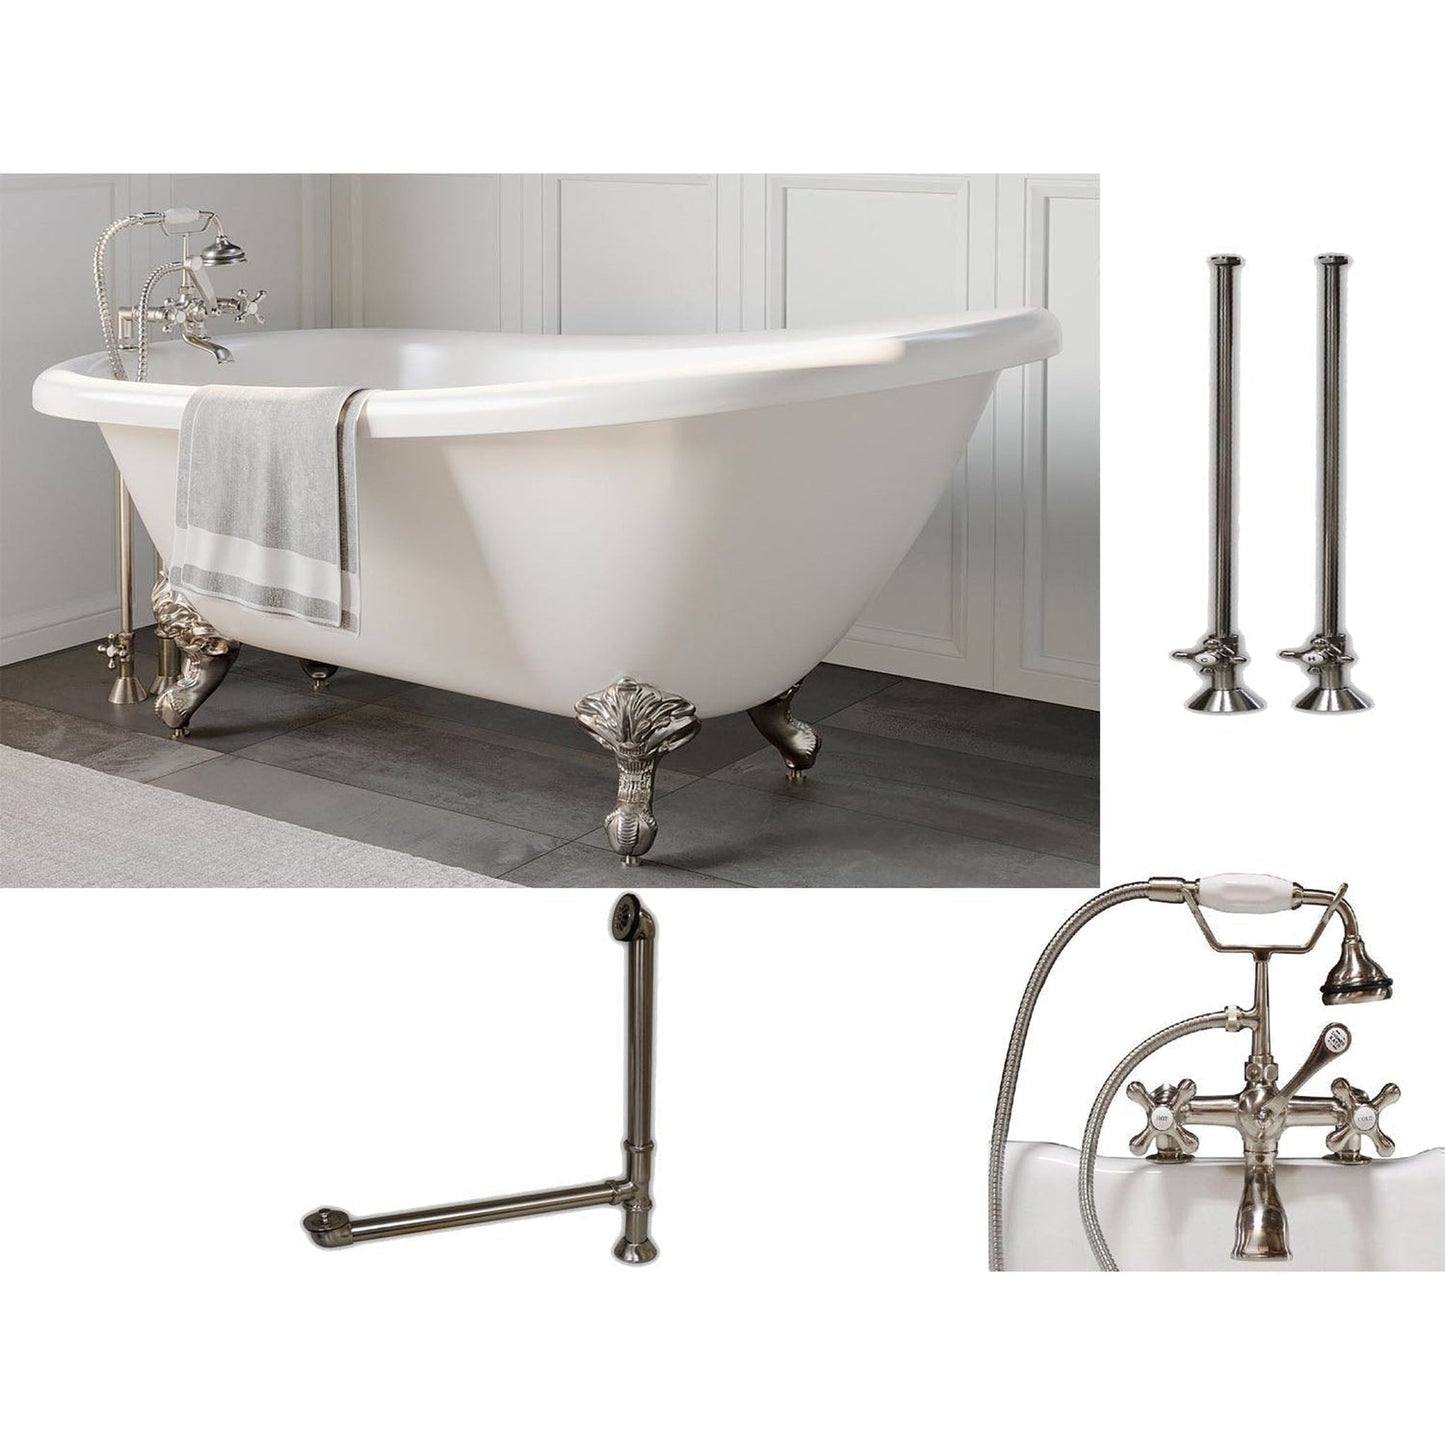 Cambridge Plumbing 61" White Acrylic Single Slipper Clawfeet Bathtub With Deck Holes And Complete Plumbing Package Including 2” Riser Deck Mount Faucet, Supply Lines, Drain And Overflow Assembly In Brushed Nickel